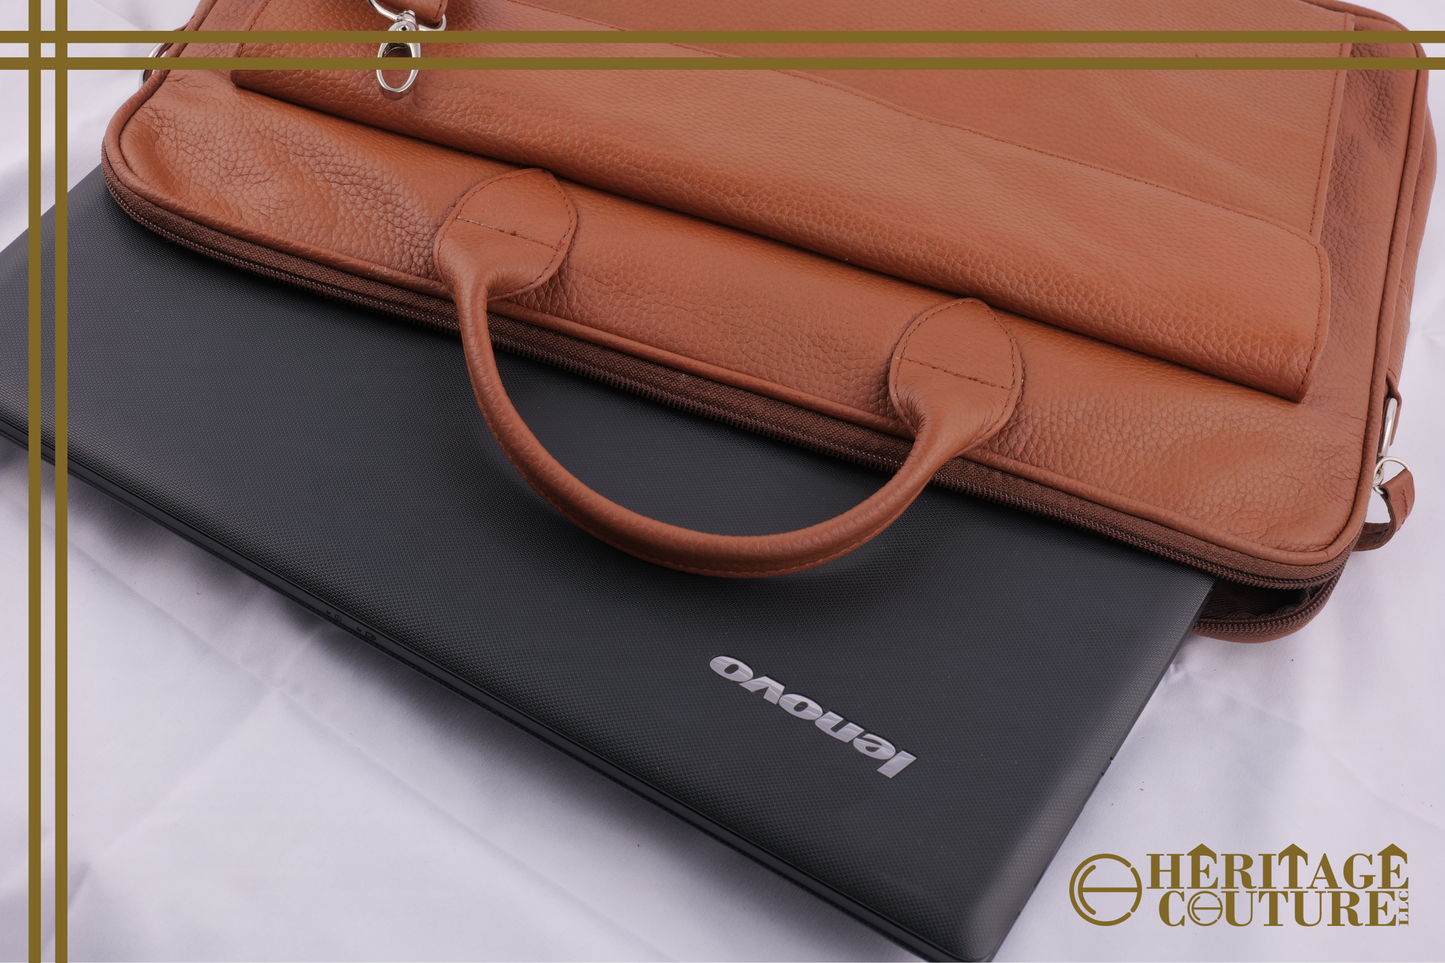 HC037 | Timeless Elegance: Brown Leather Laptop Bag | 100% Genuine Leather | Spacious Compartments for Notebooks and Documents